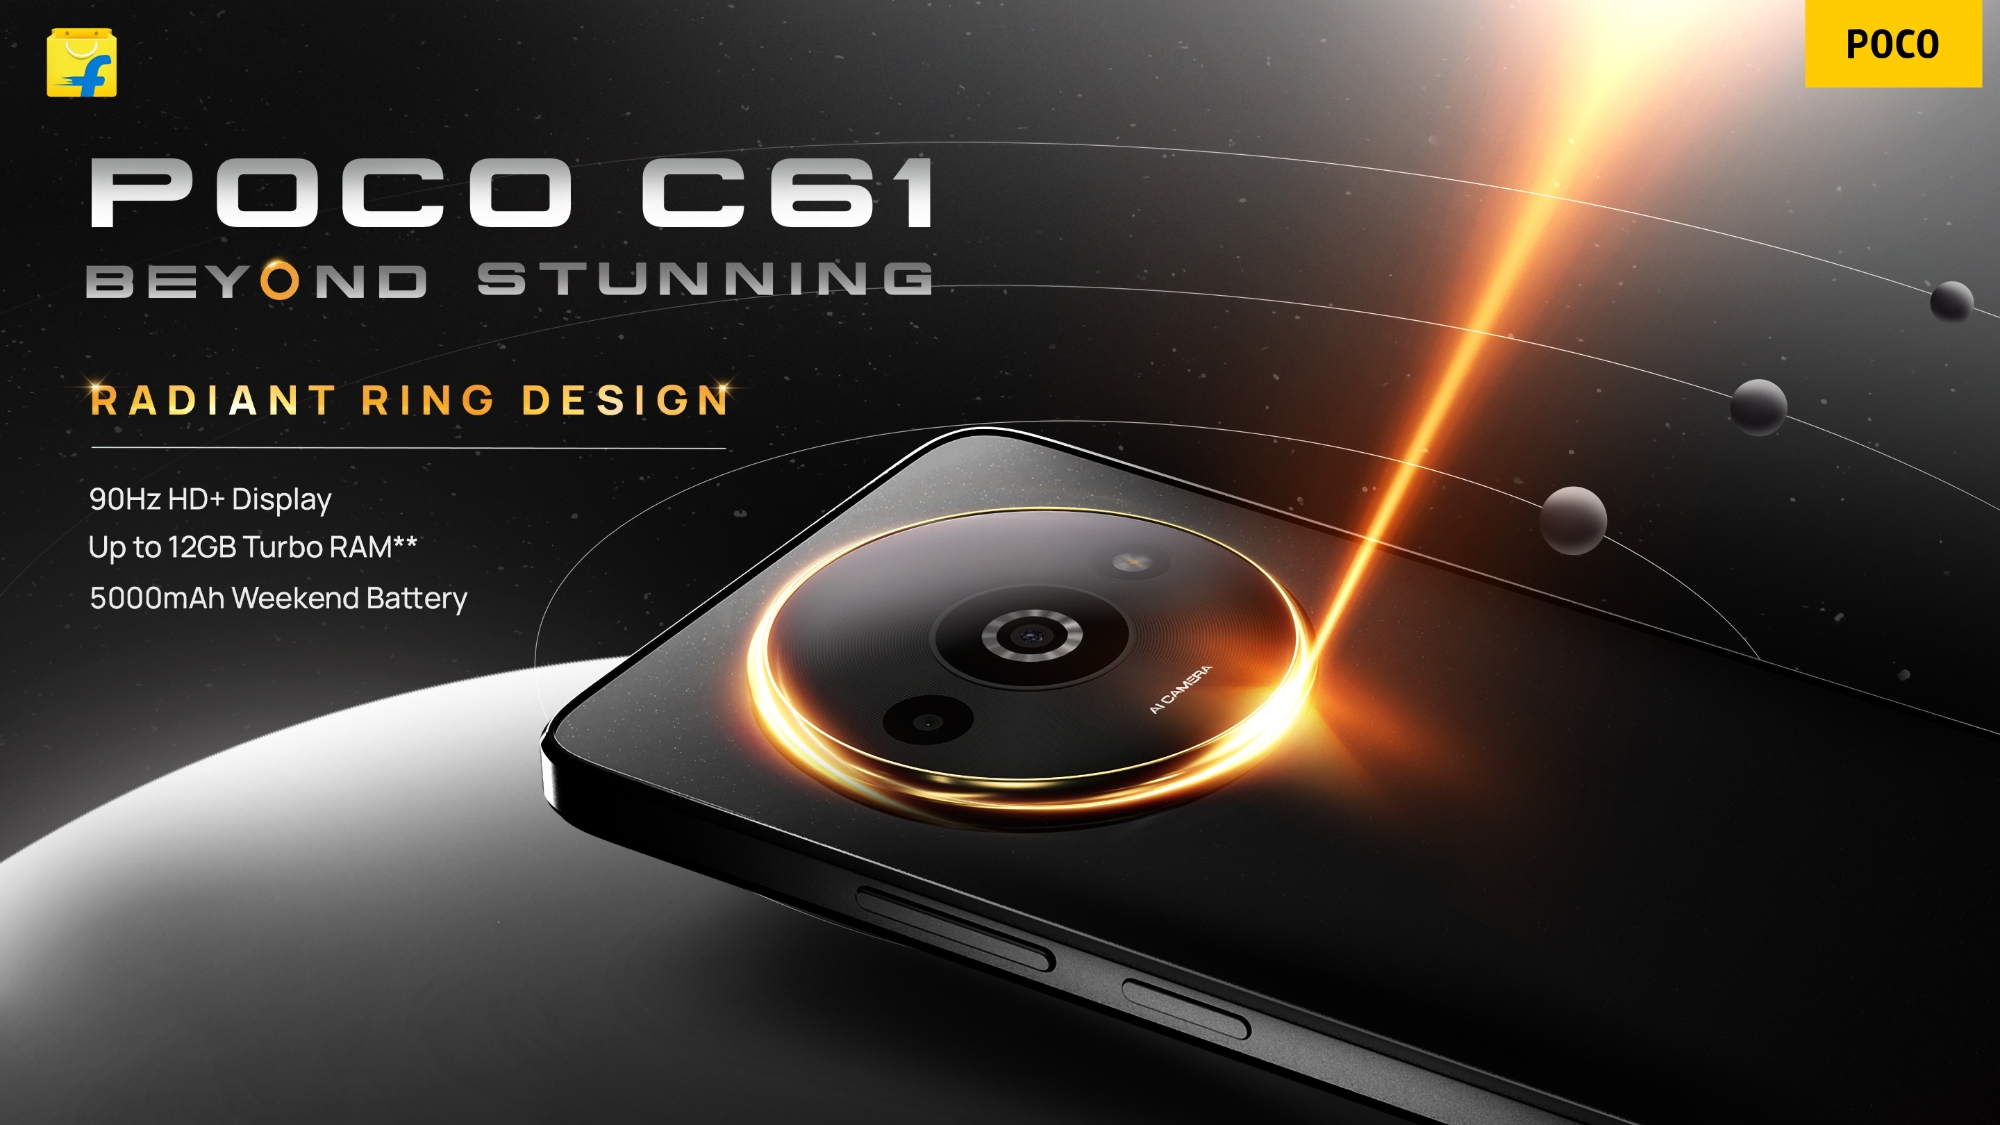 POCO C61: 90Hz display, MediaTek Helio G36 chip and dual camera priced from $89